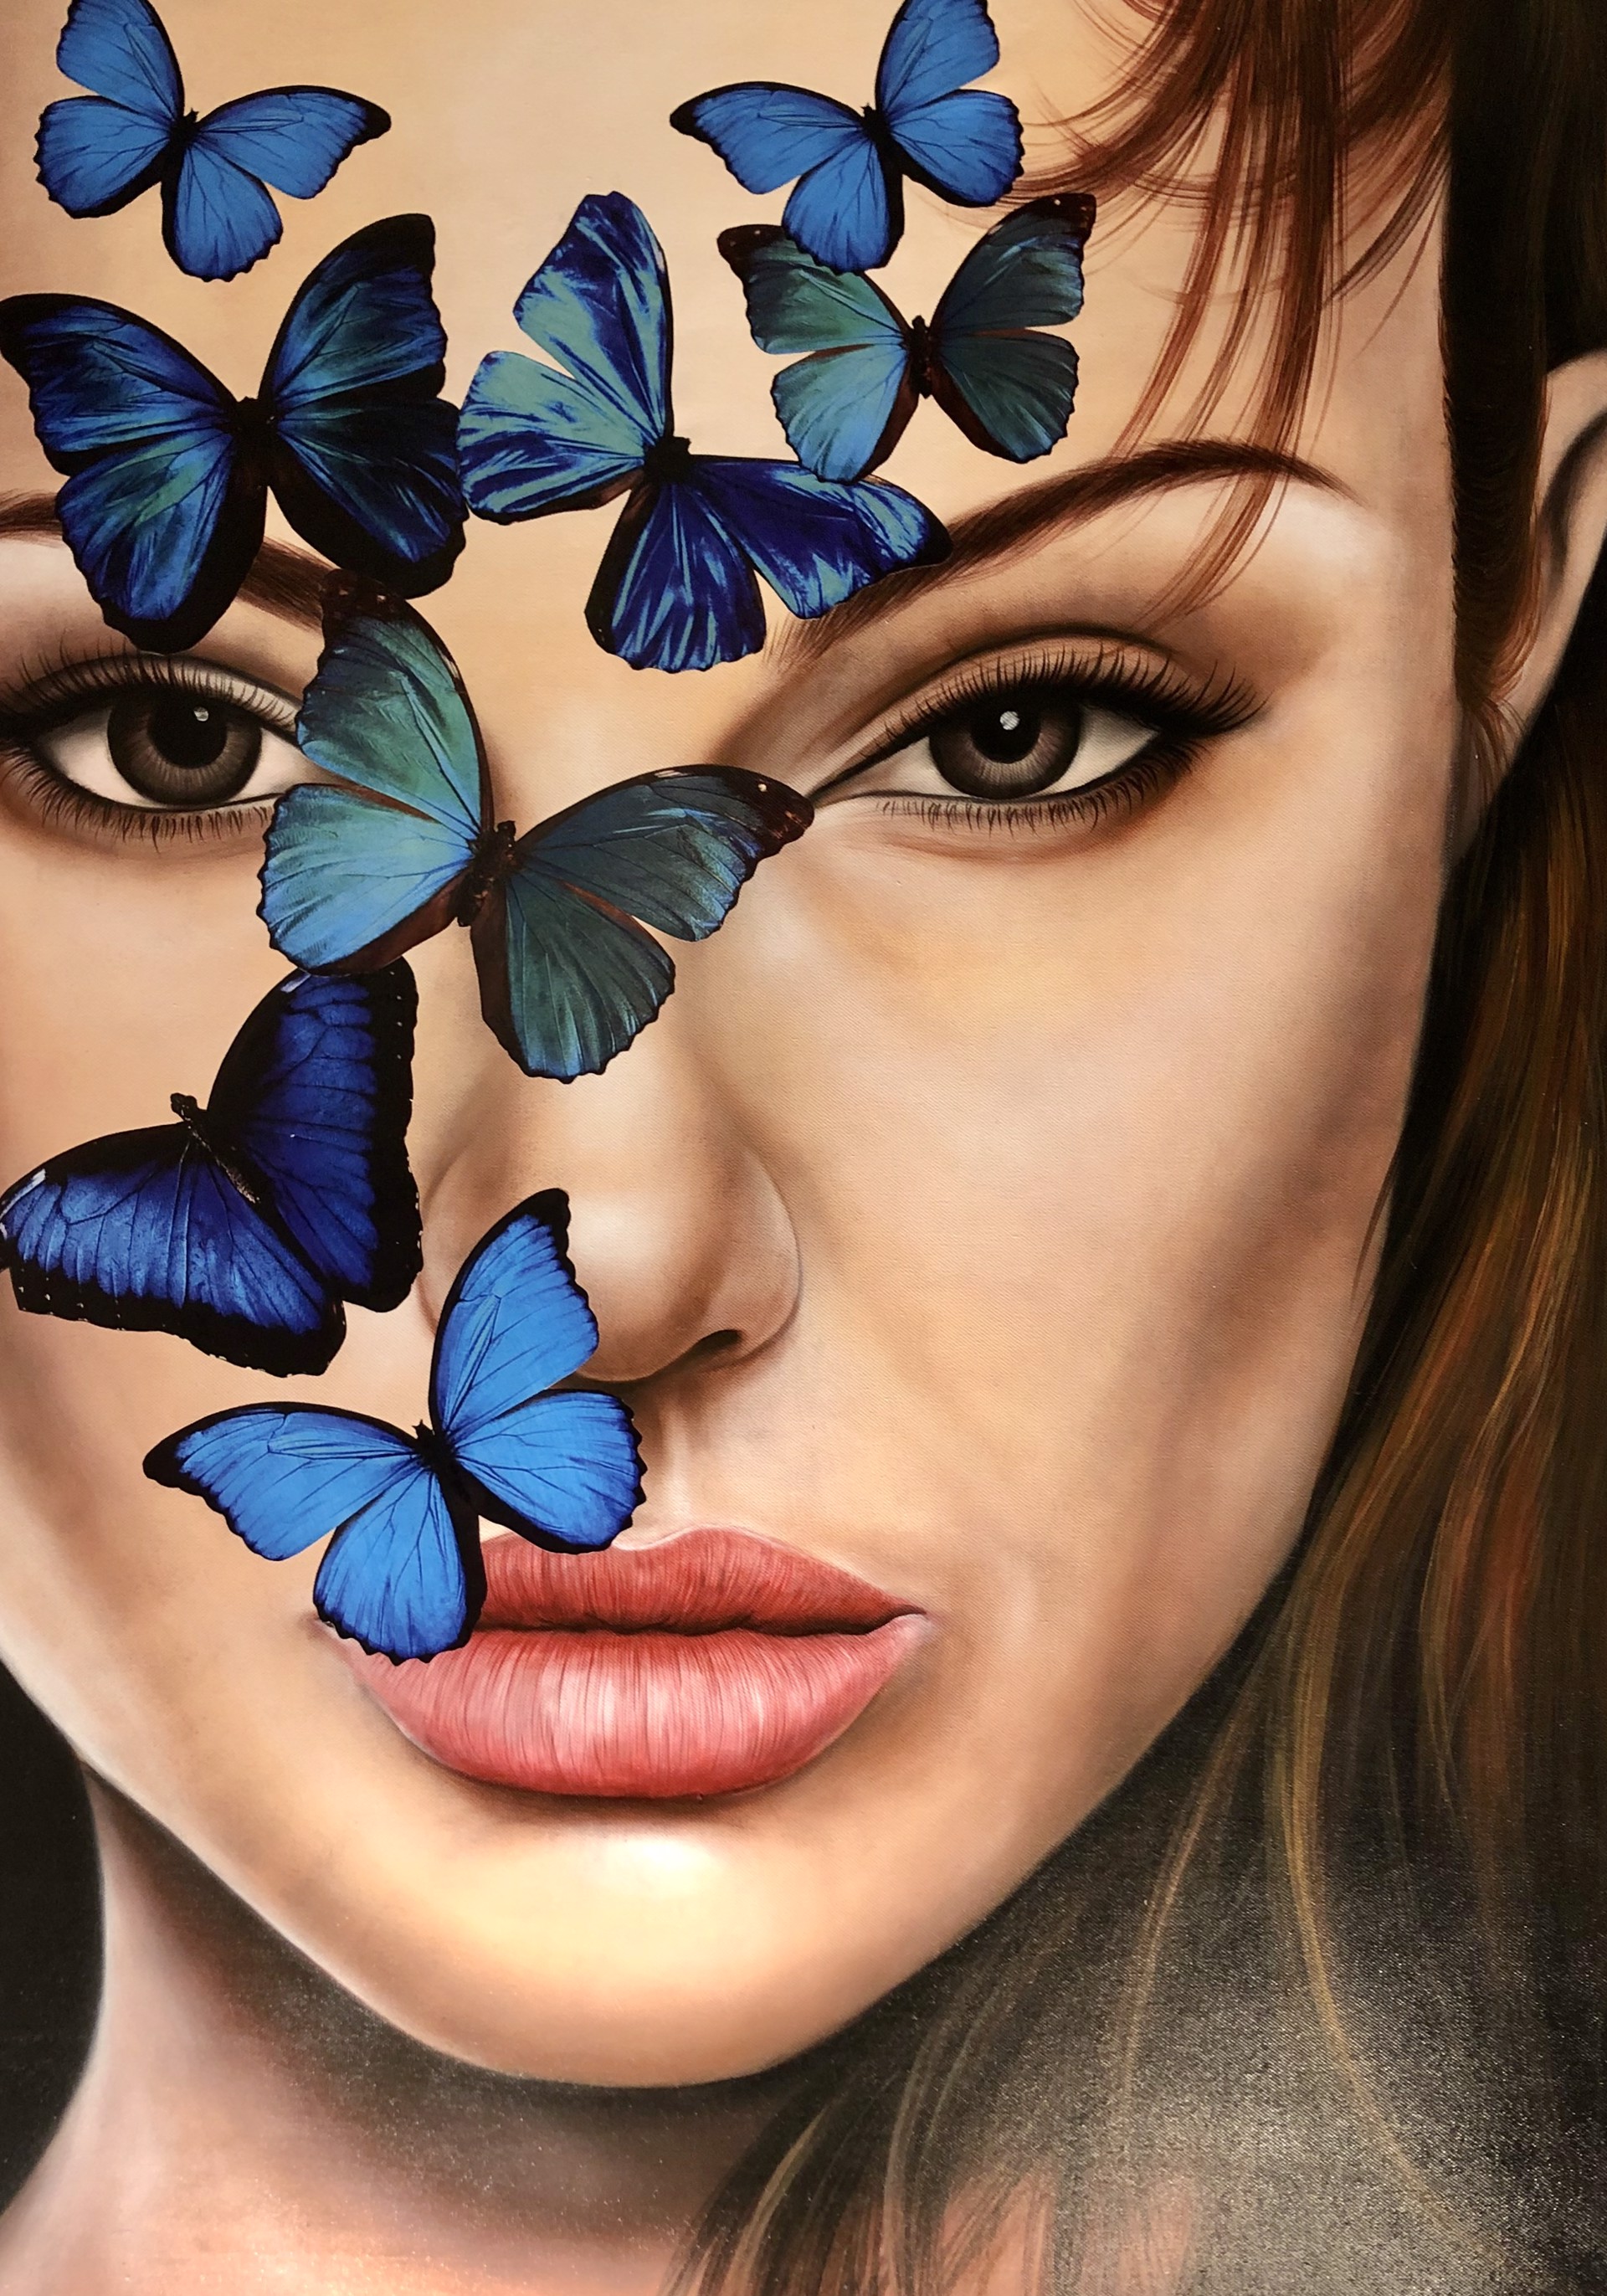 "Angelina with Blue Butterflies" by BuMa Project